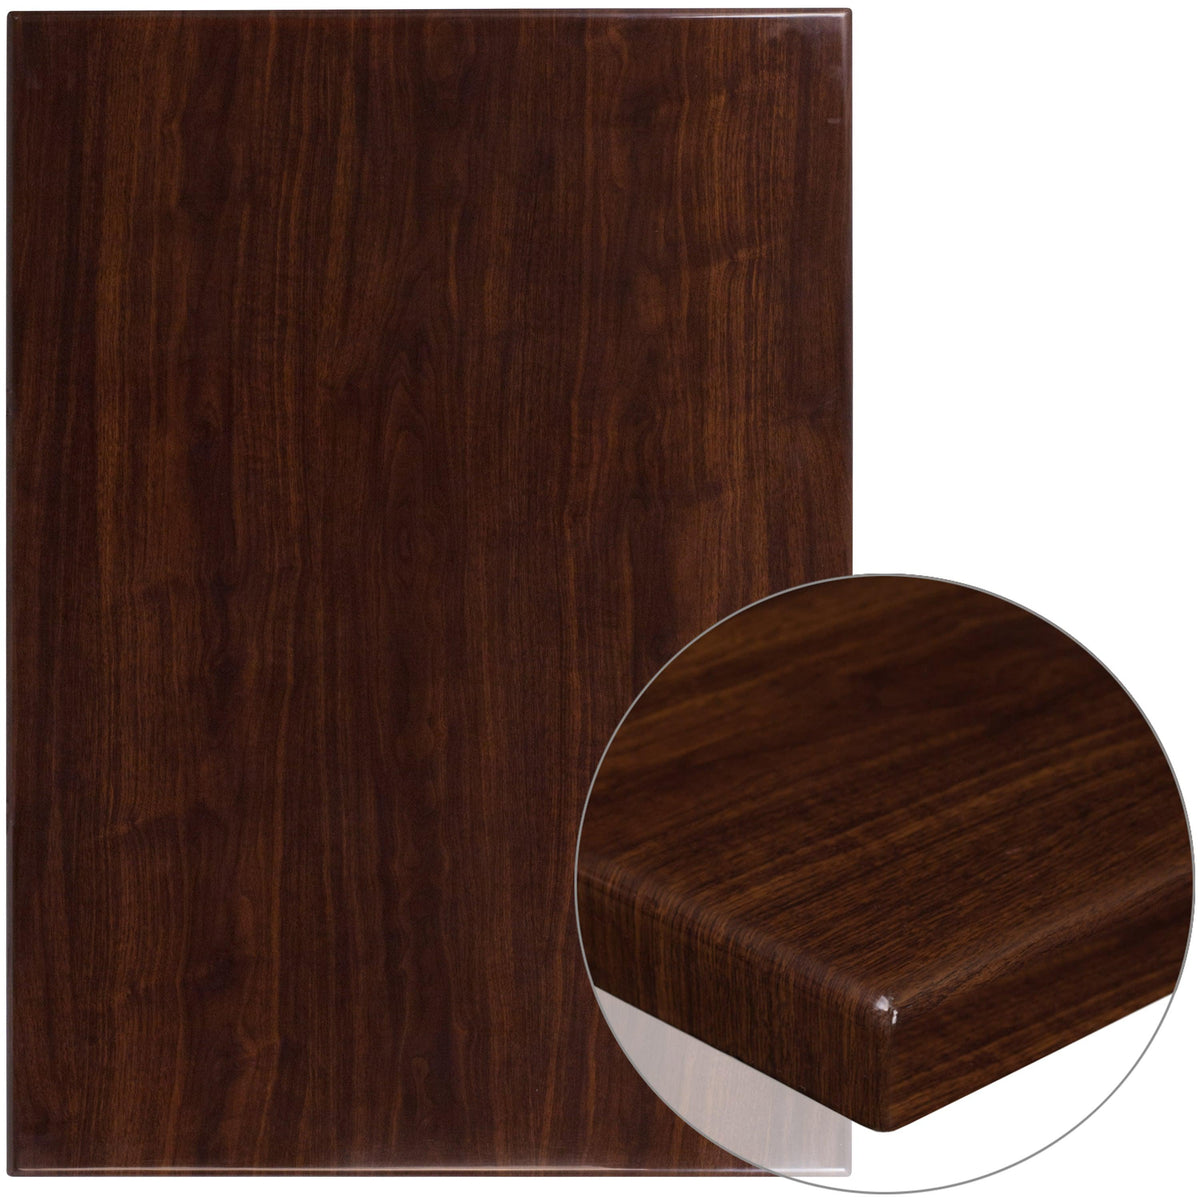 Walnut |#| 30inch x 42inch Rectangular High-Gloss Walnut Resin Table Top with 2inch Thick Edge